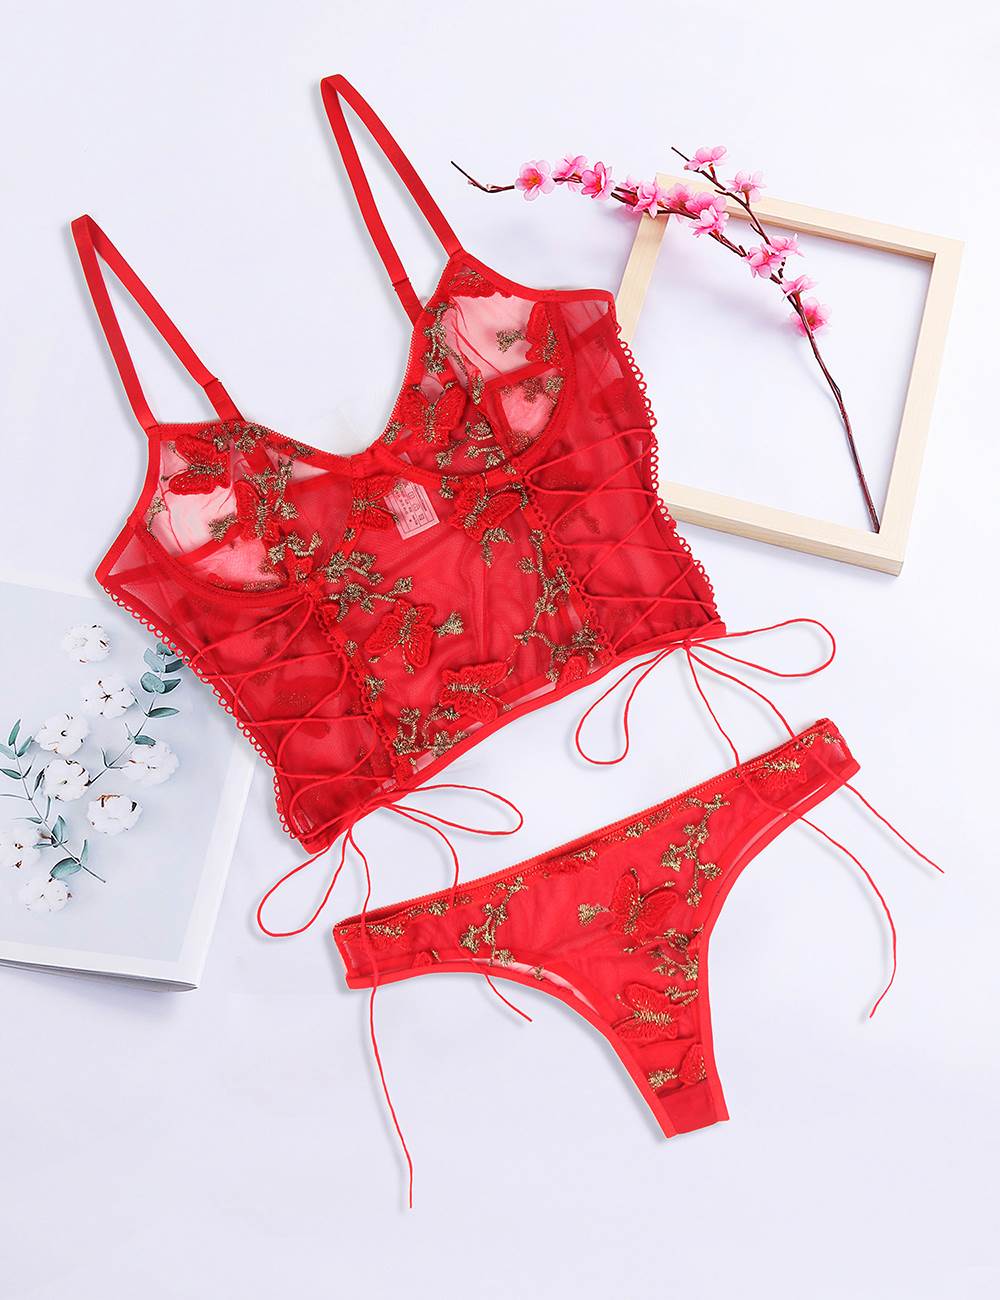 Rue21 2-Pack Red Lavender Butterfly Lace Thong Undies Set